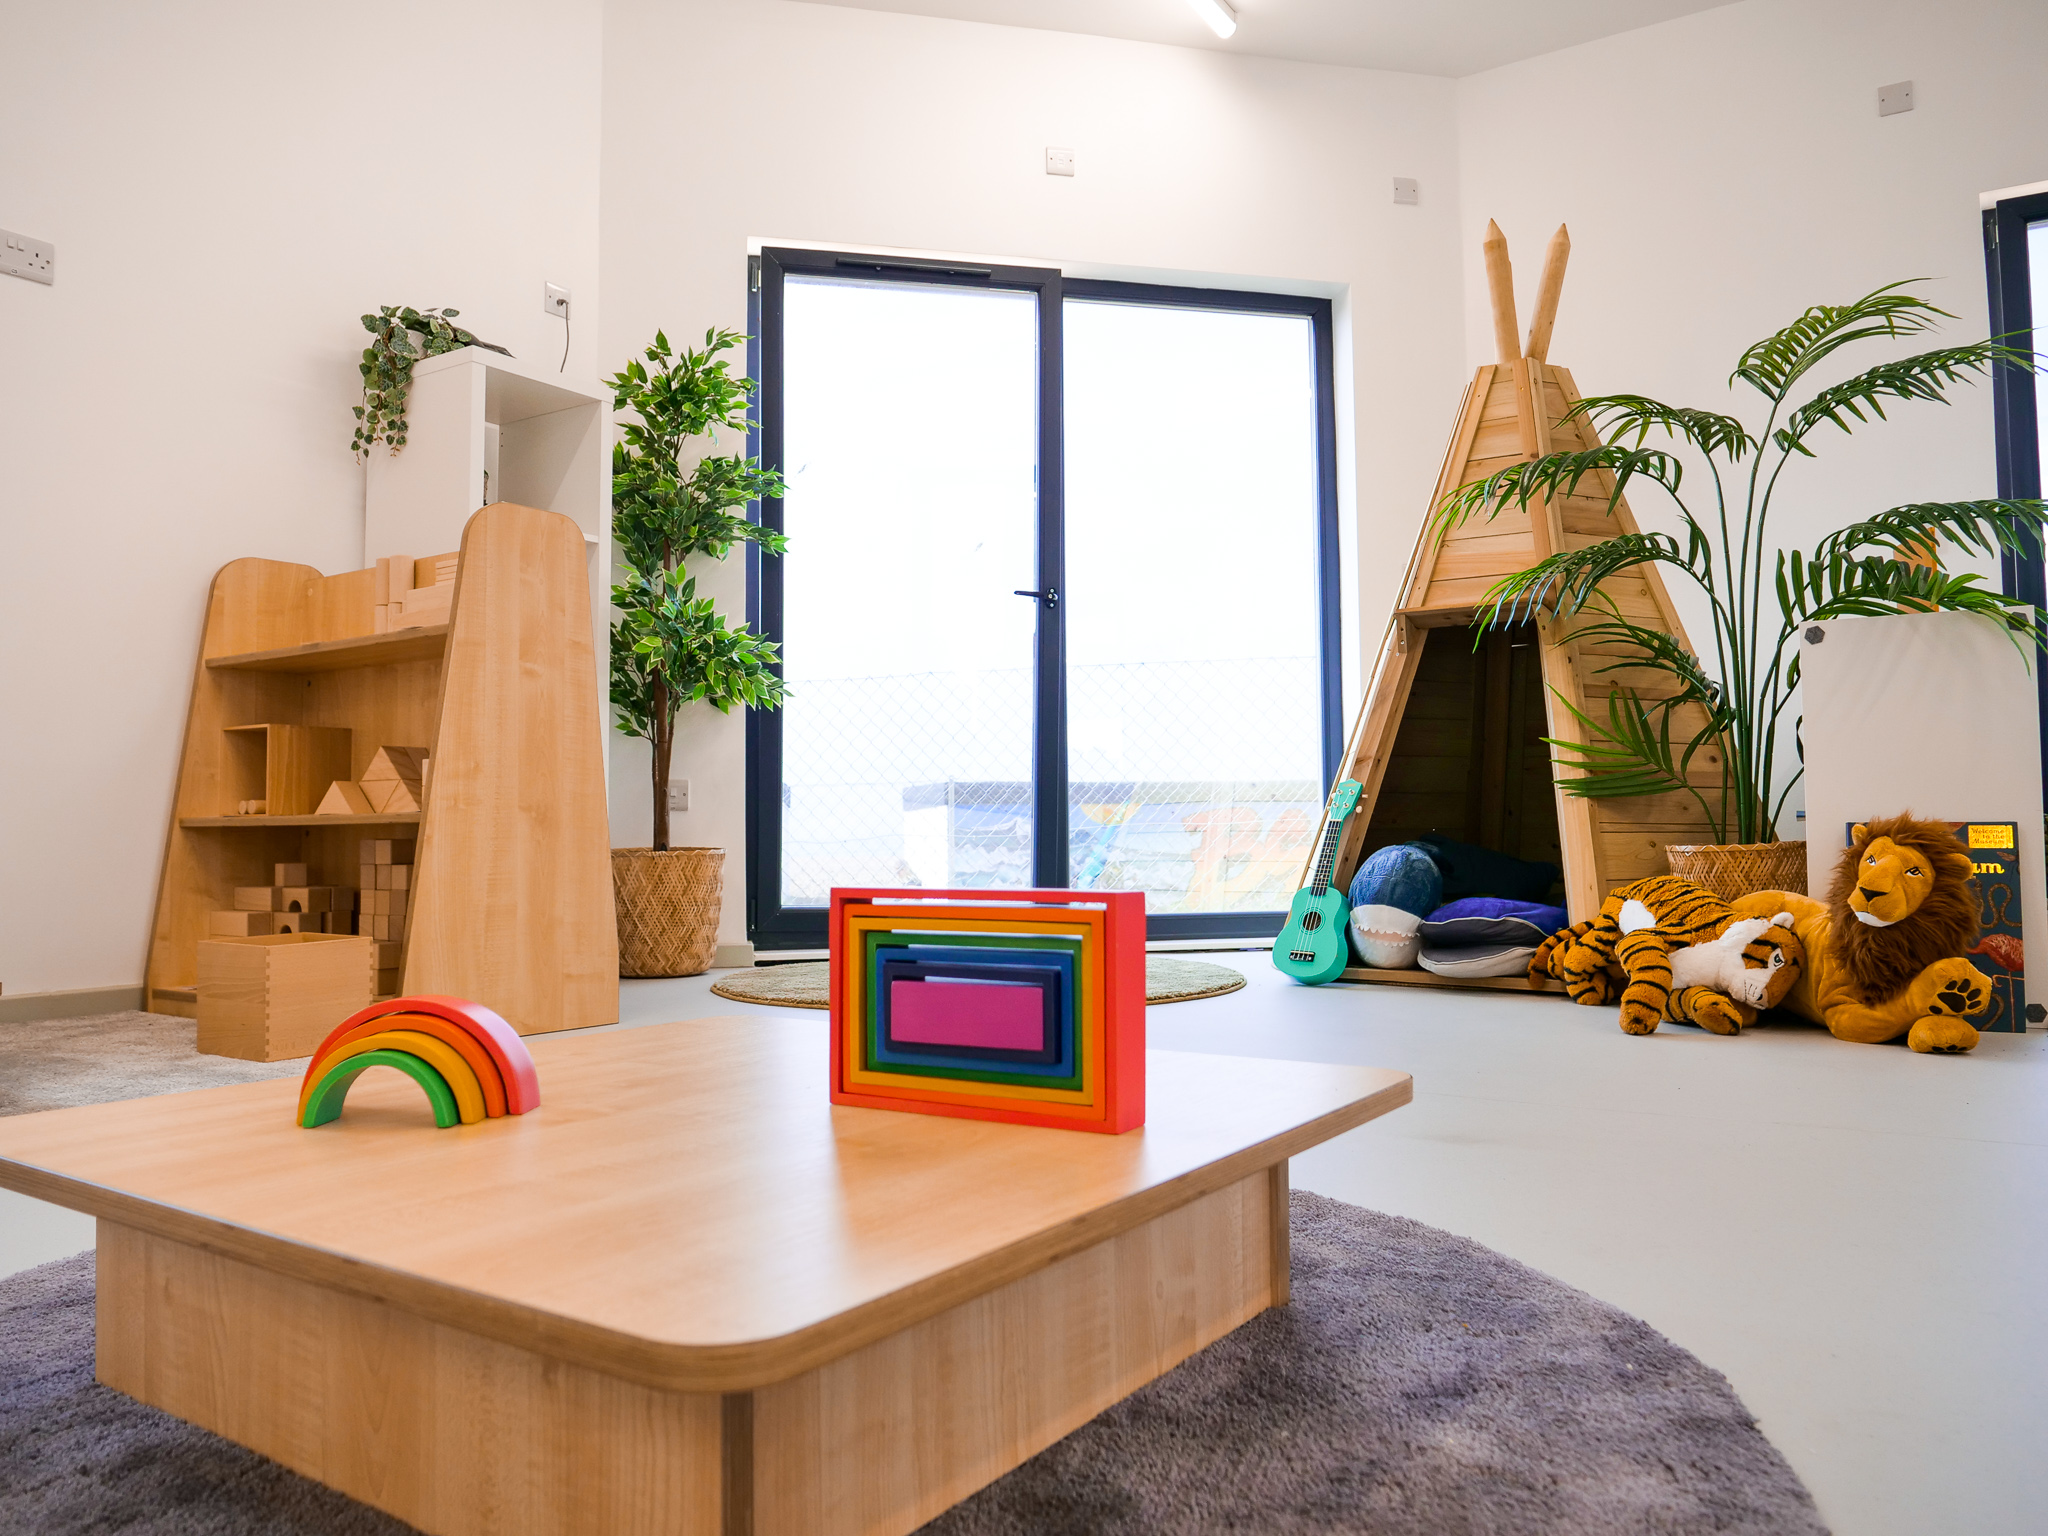 nursery interior with colourful wooden blocks, a wooden tent and cuddly animal toys